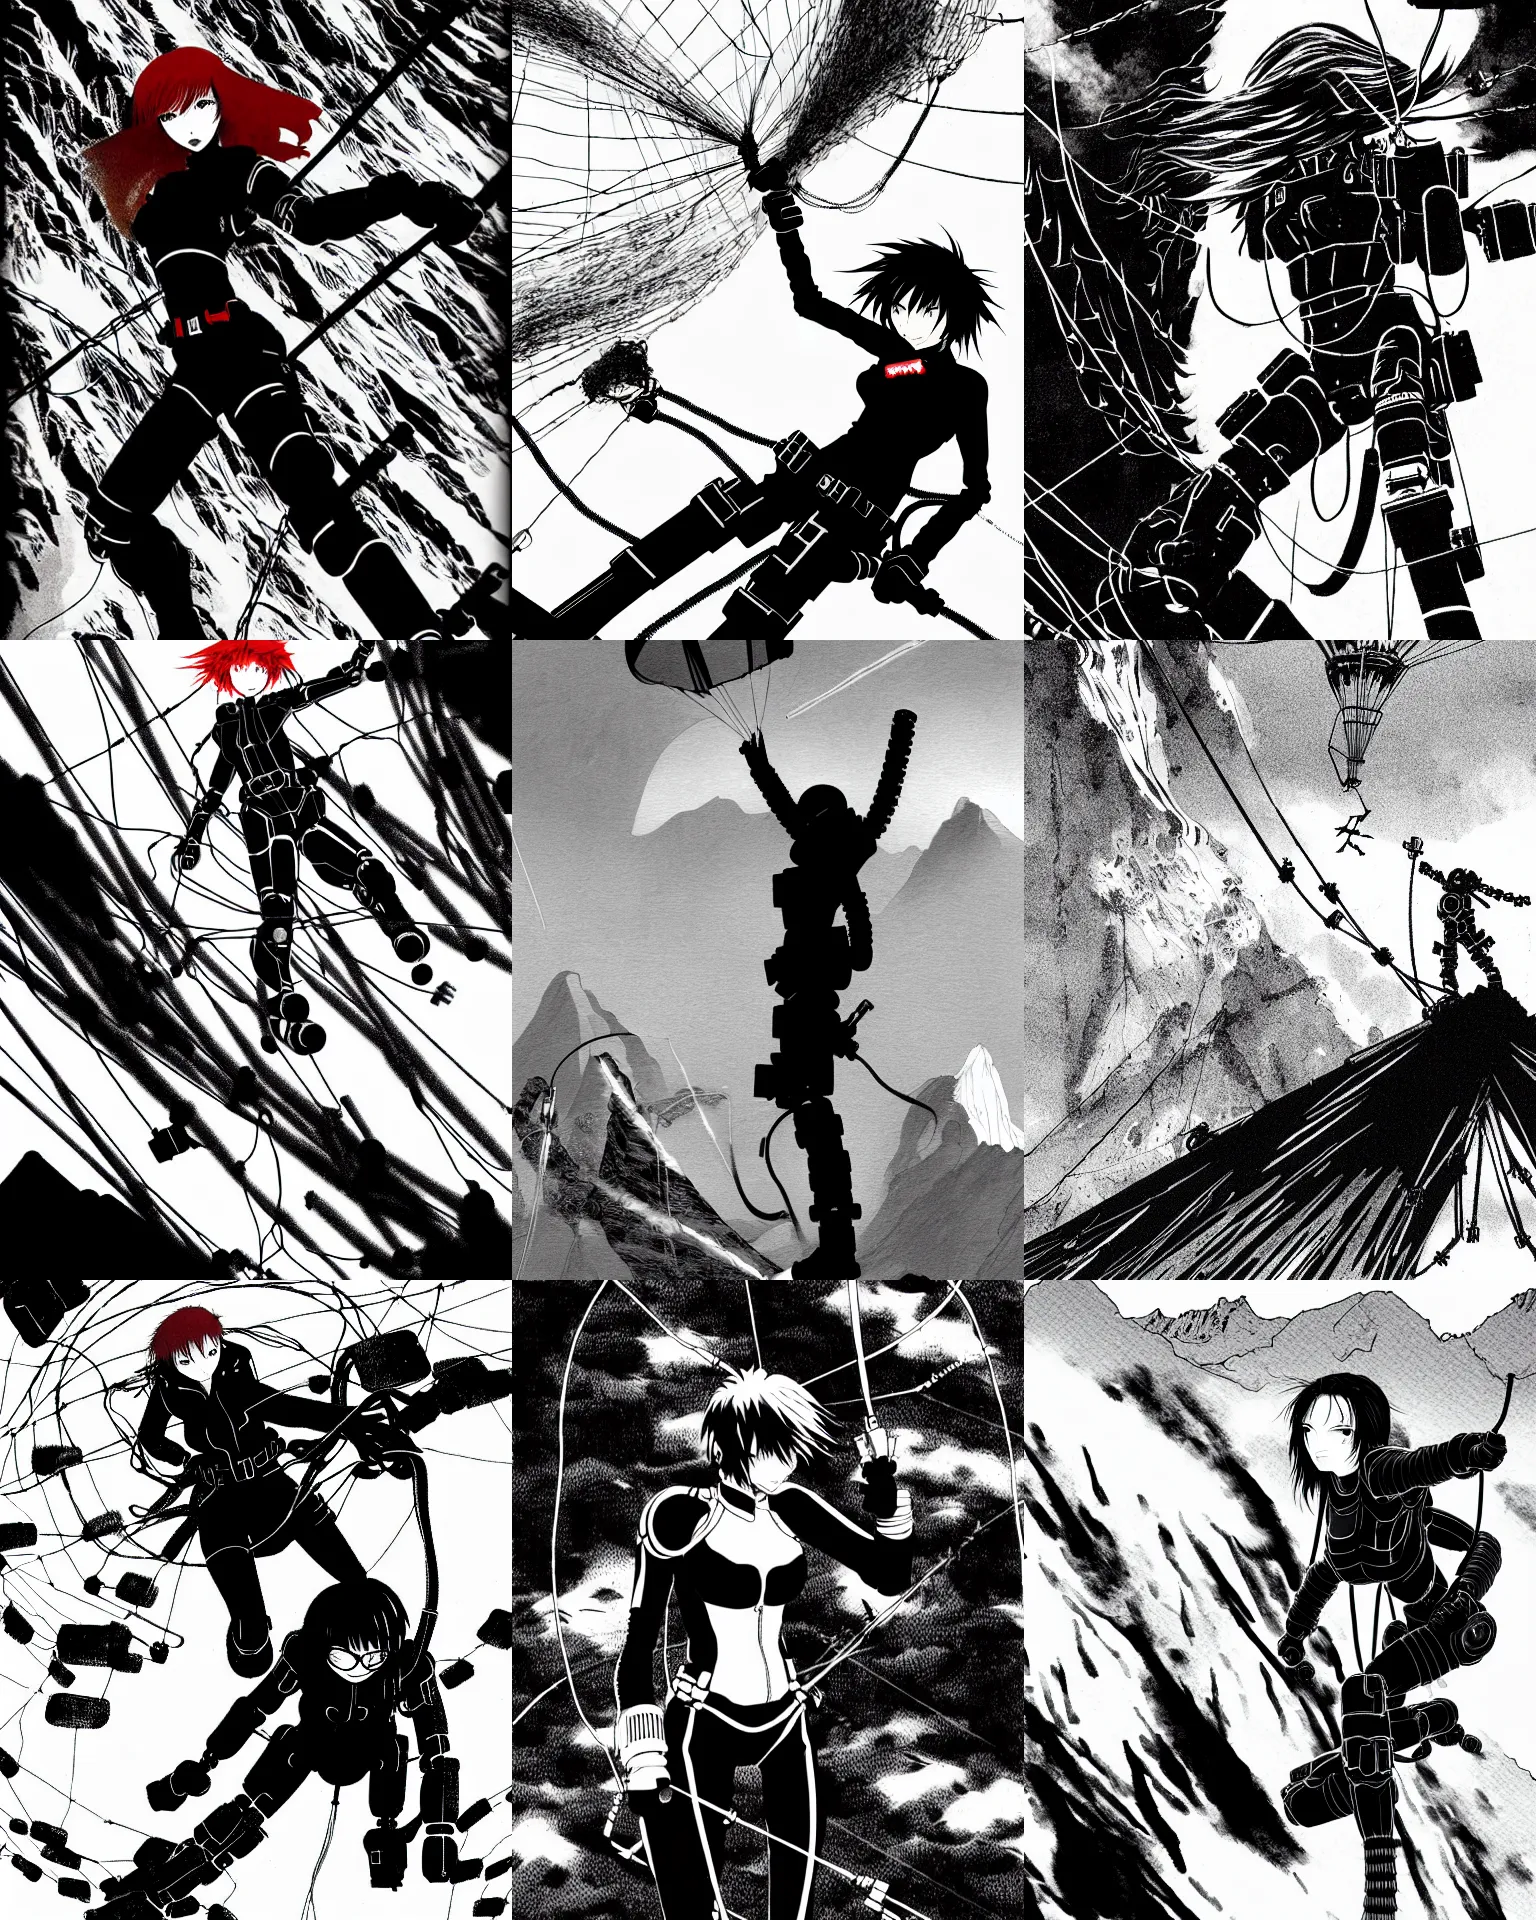 Prompt: black widow red hair flies with a parachute from everest and fires pistols at robots with techno details, by tsutomu nihei, black and white, wires clouds background